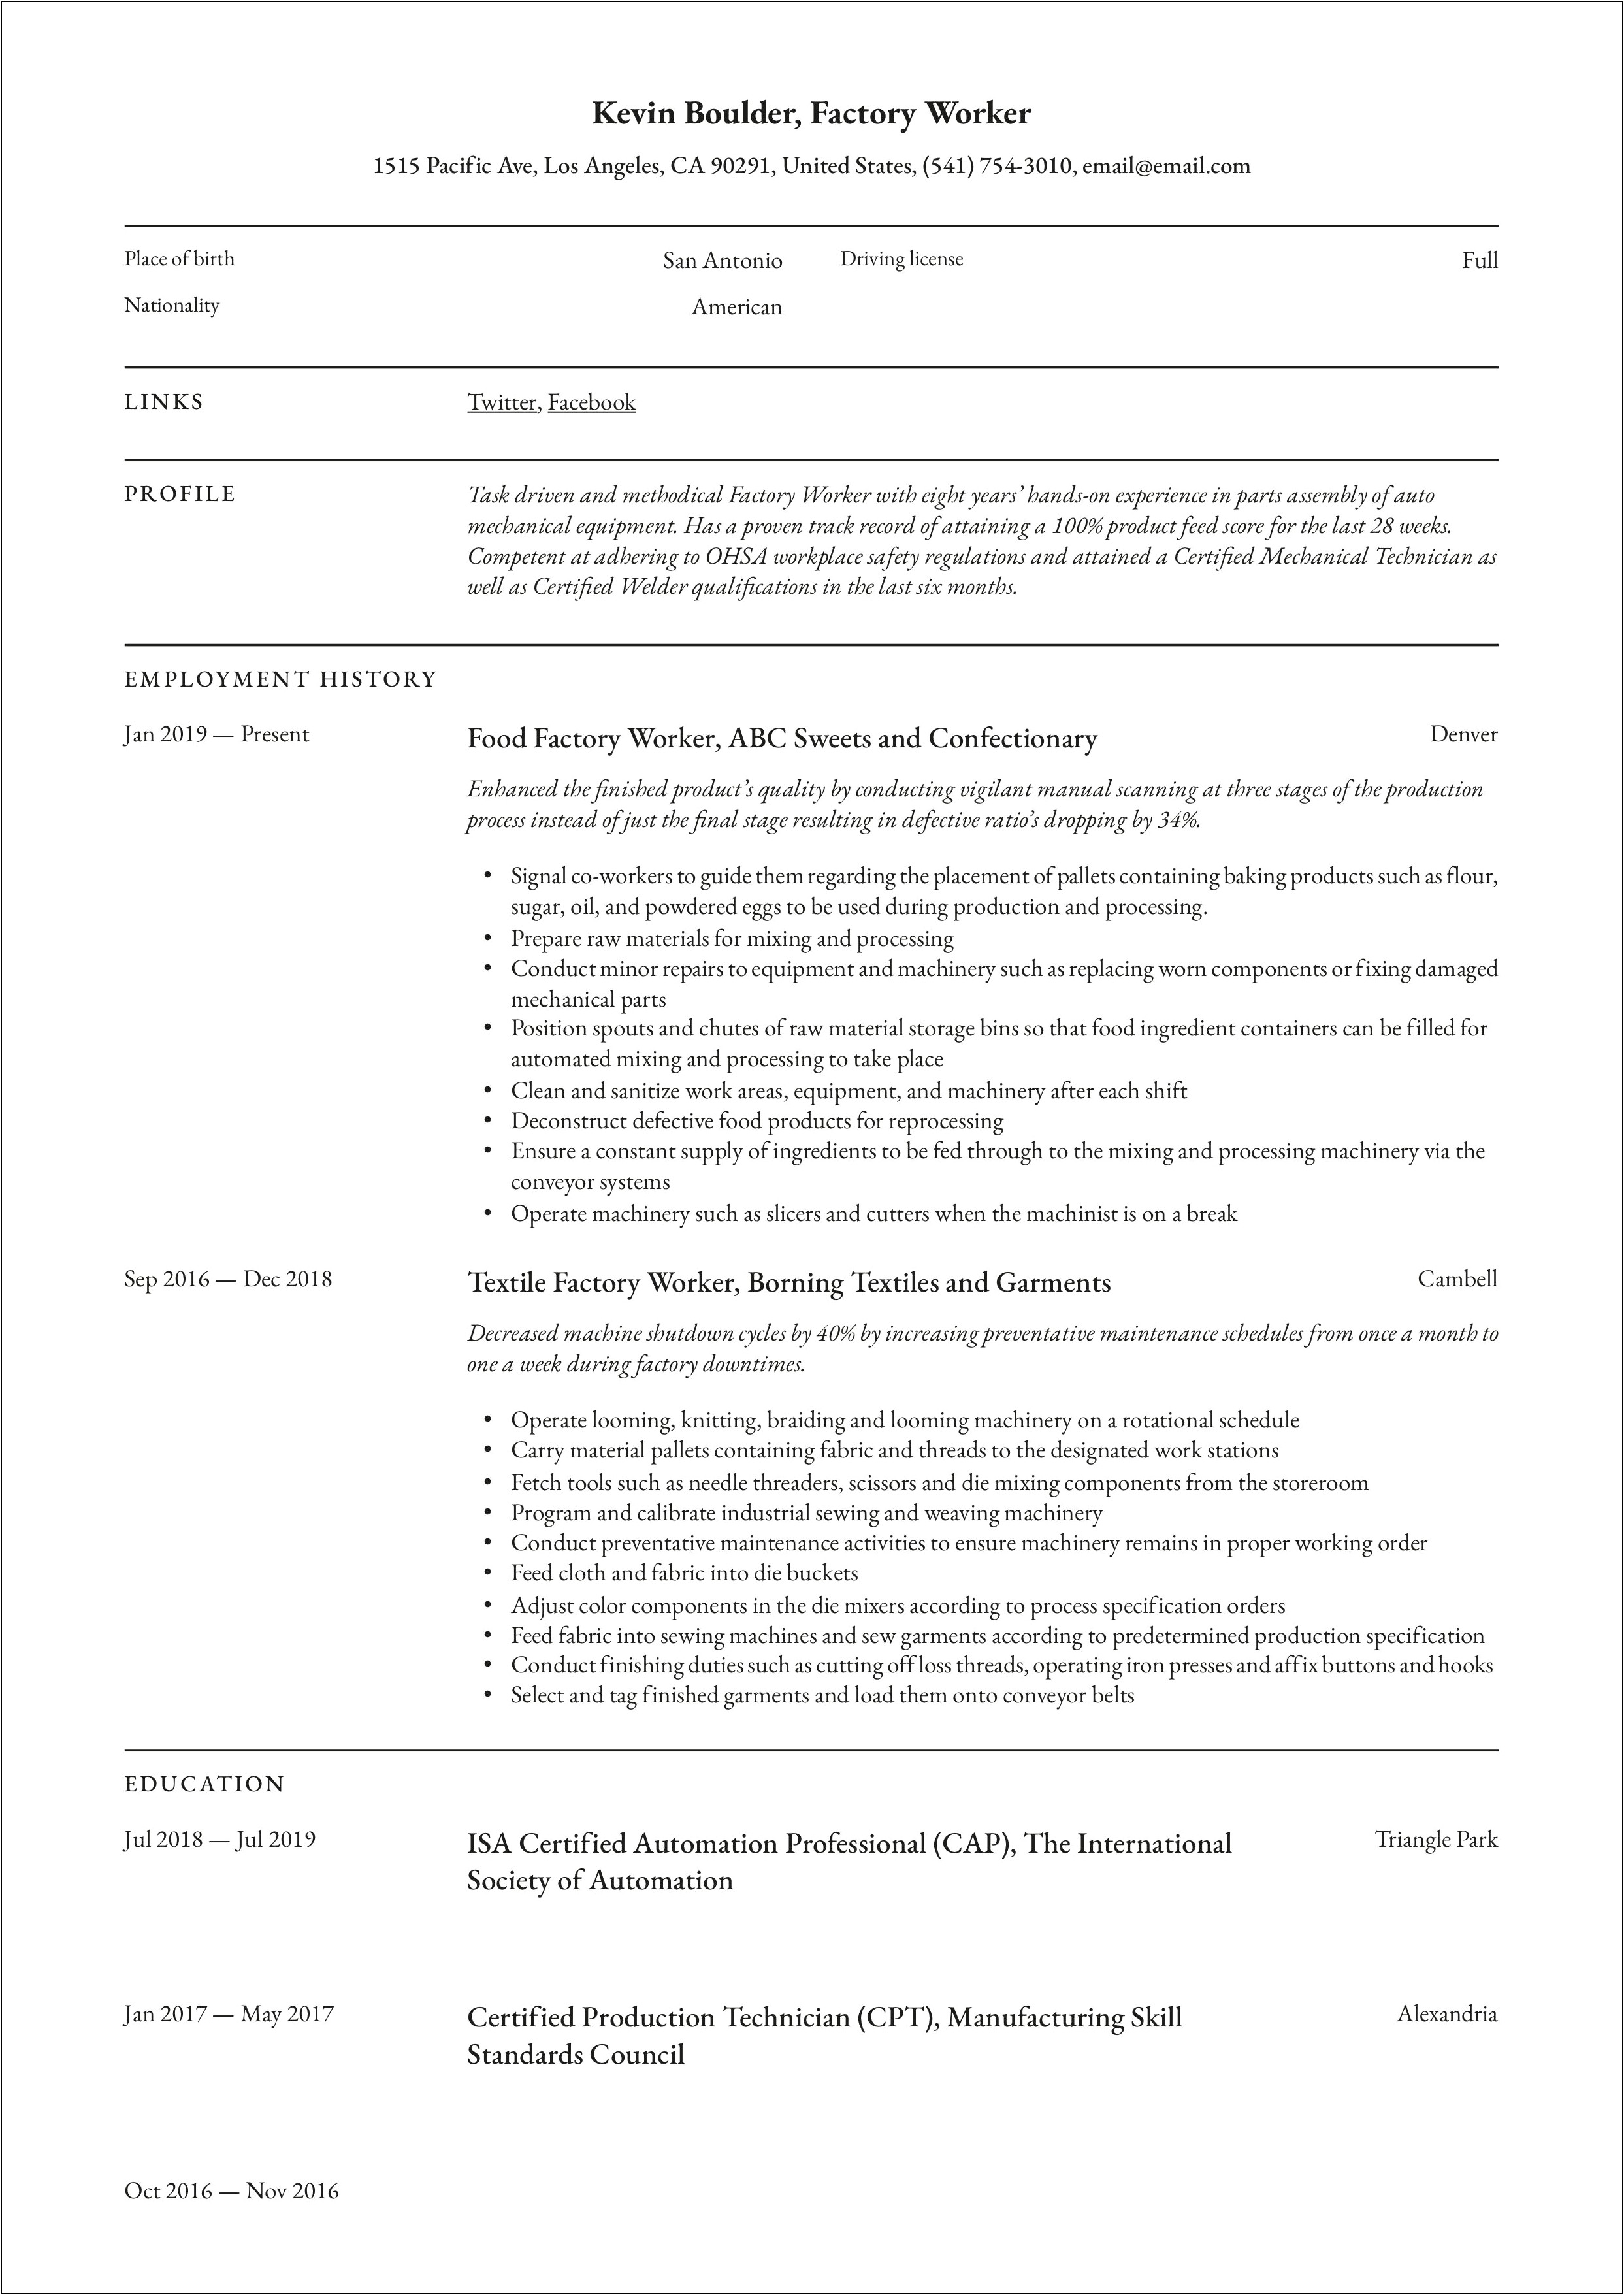 Examples Of Faxtory Asssembly Resumes